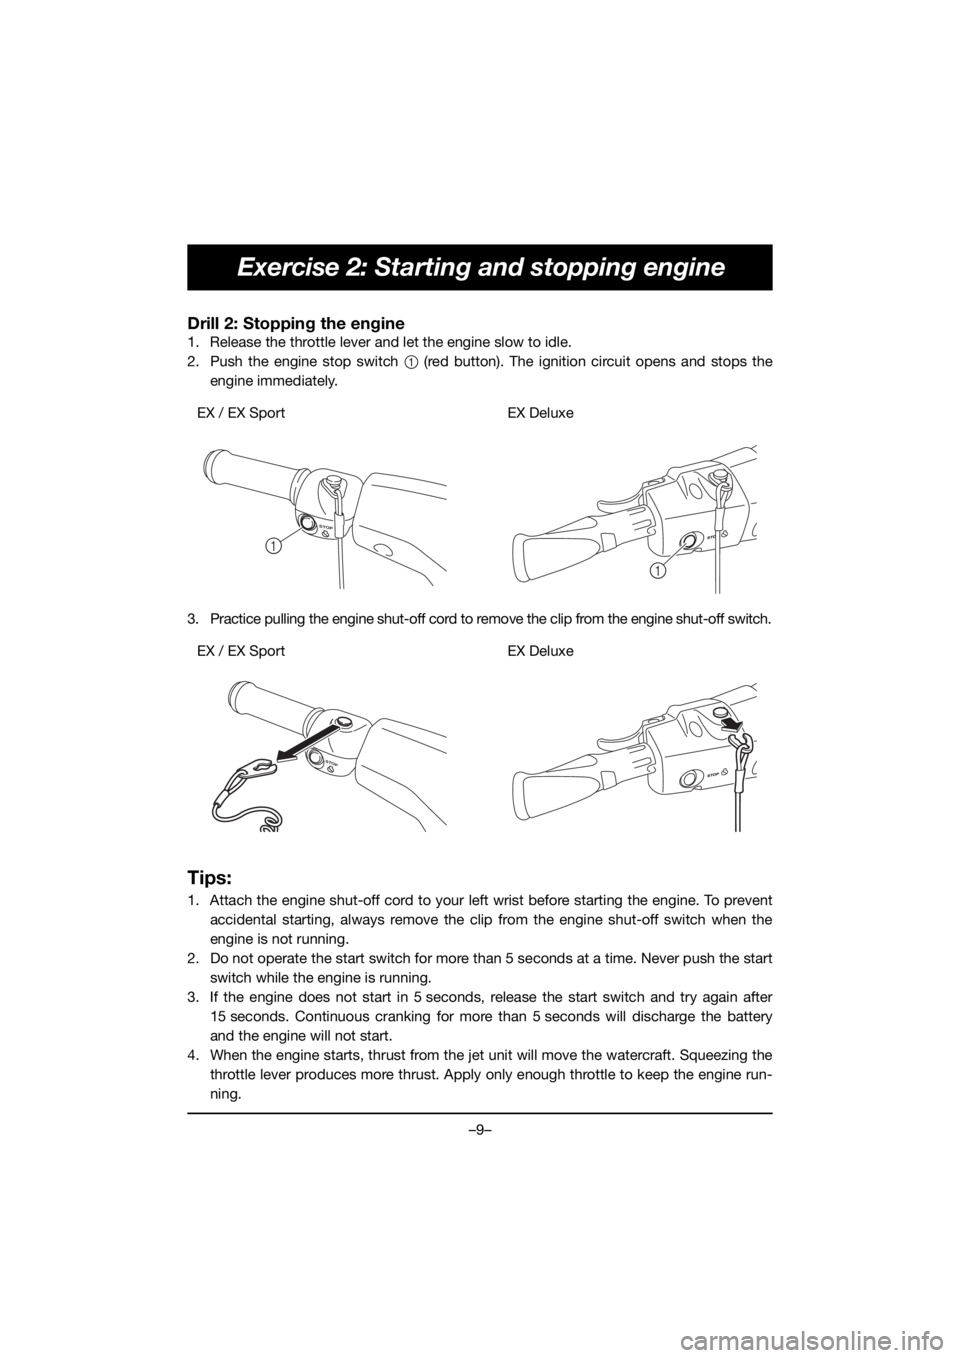 YAMAHA EX SPORT 2020  Owners Manual –9–
Exercise 2: Starting and stopping engine
Drill 2: Stopping the engine
1. Release the throttle lever and let the engine slow to idle.
2. Push the engine stop switch 1 (red button). The ignition